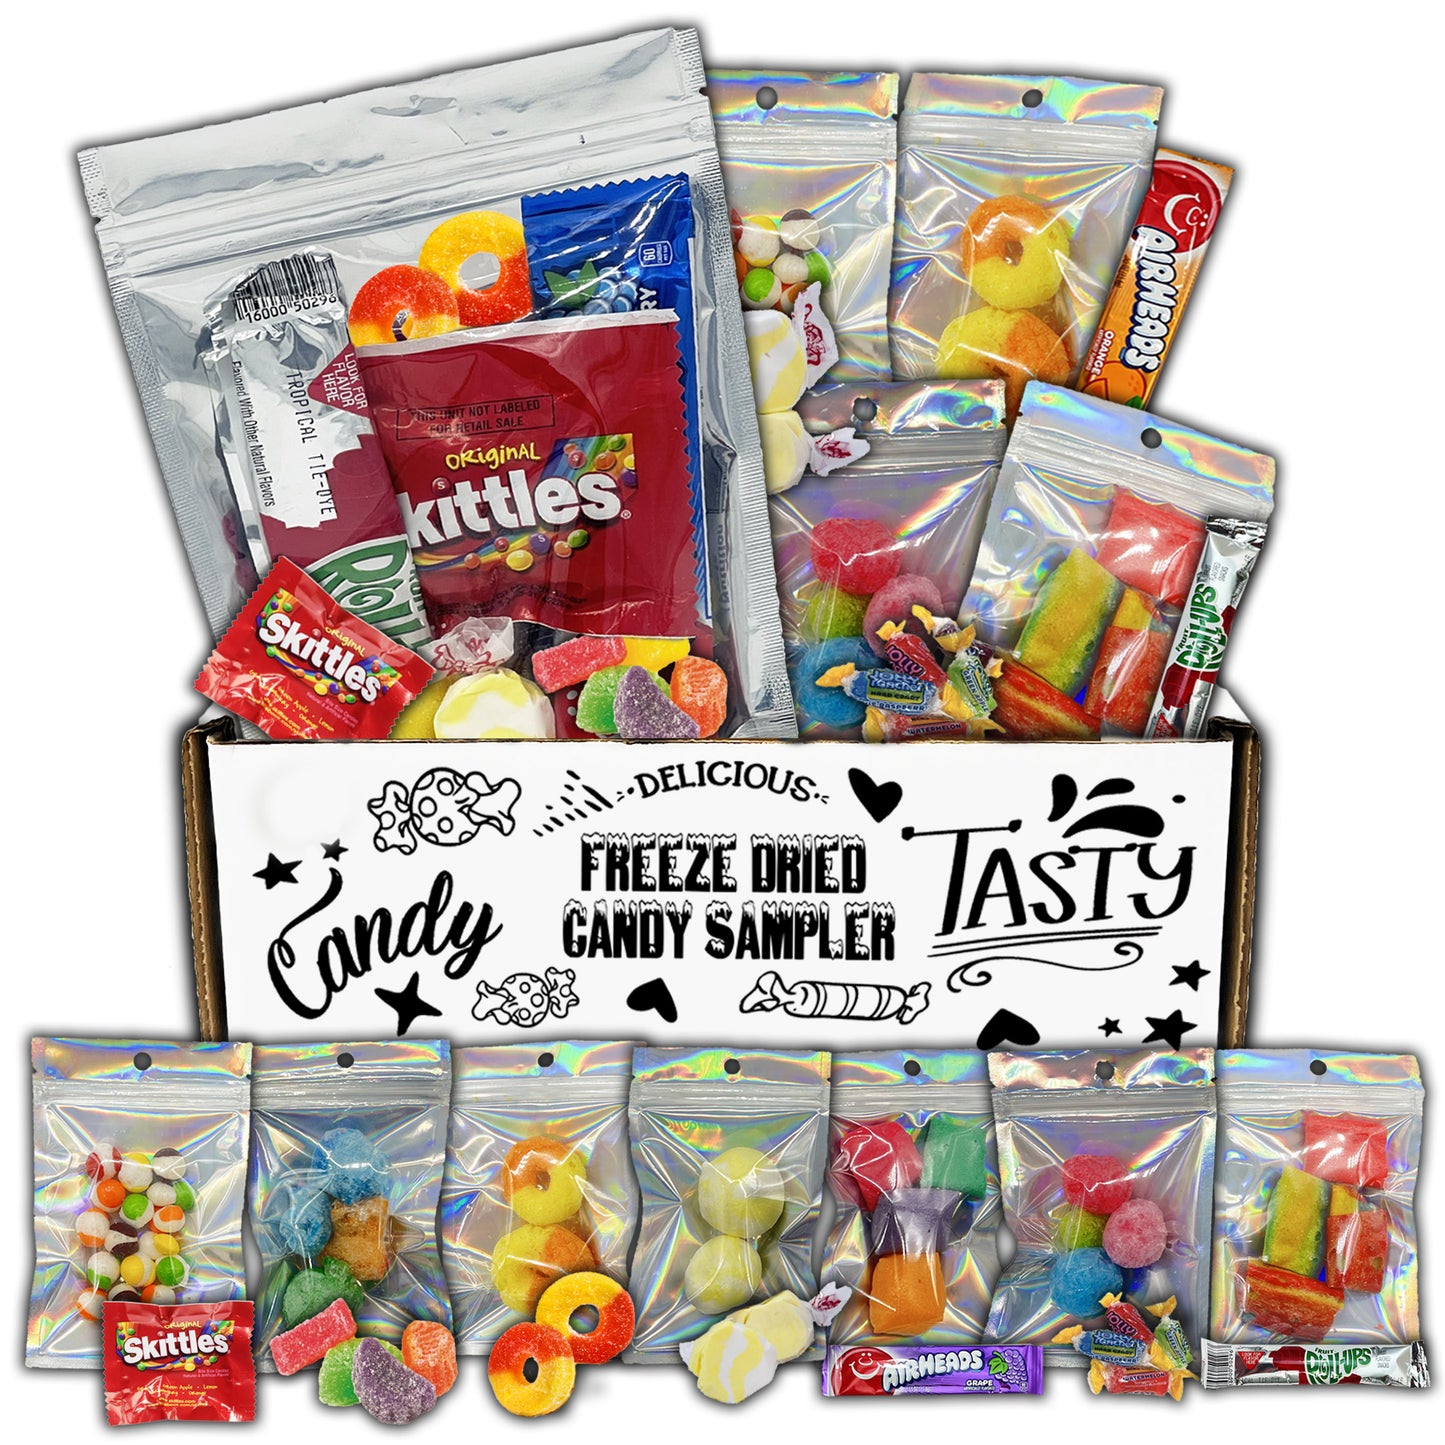 Freeze Dried Candy Sampler Variety Pack Gift Box- Crunchy and Airy or Chewy and Sticky- Taste the Transformation